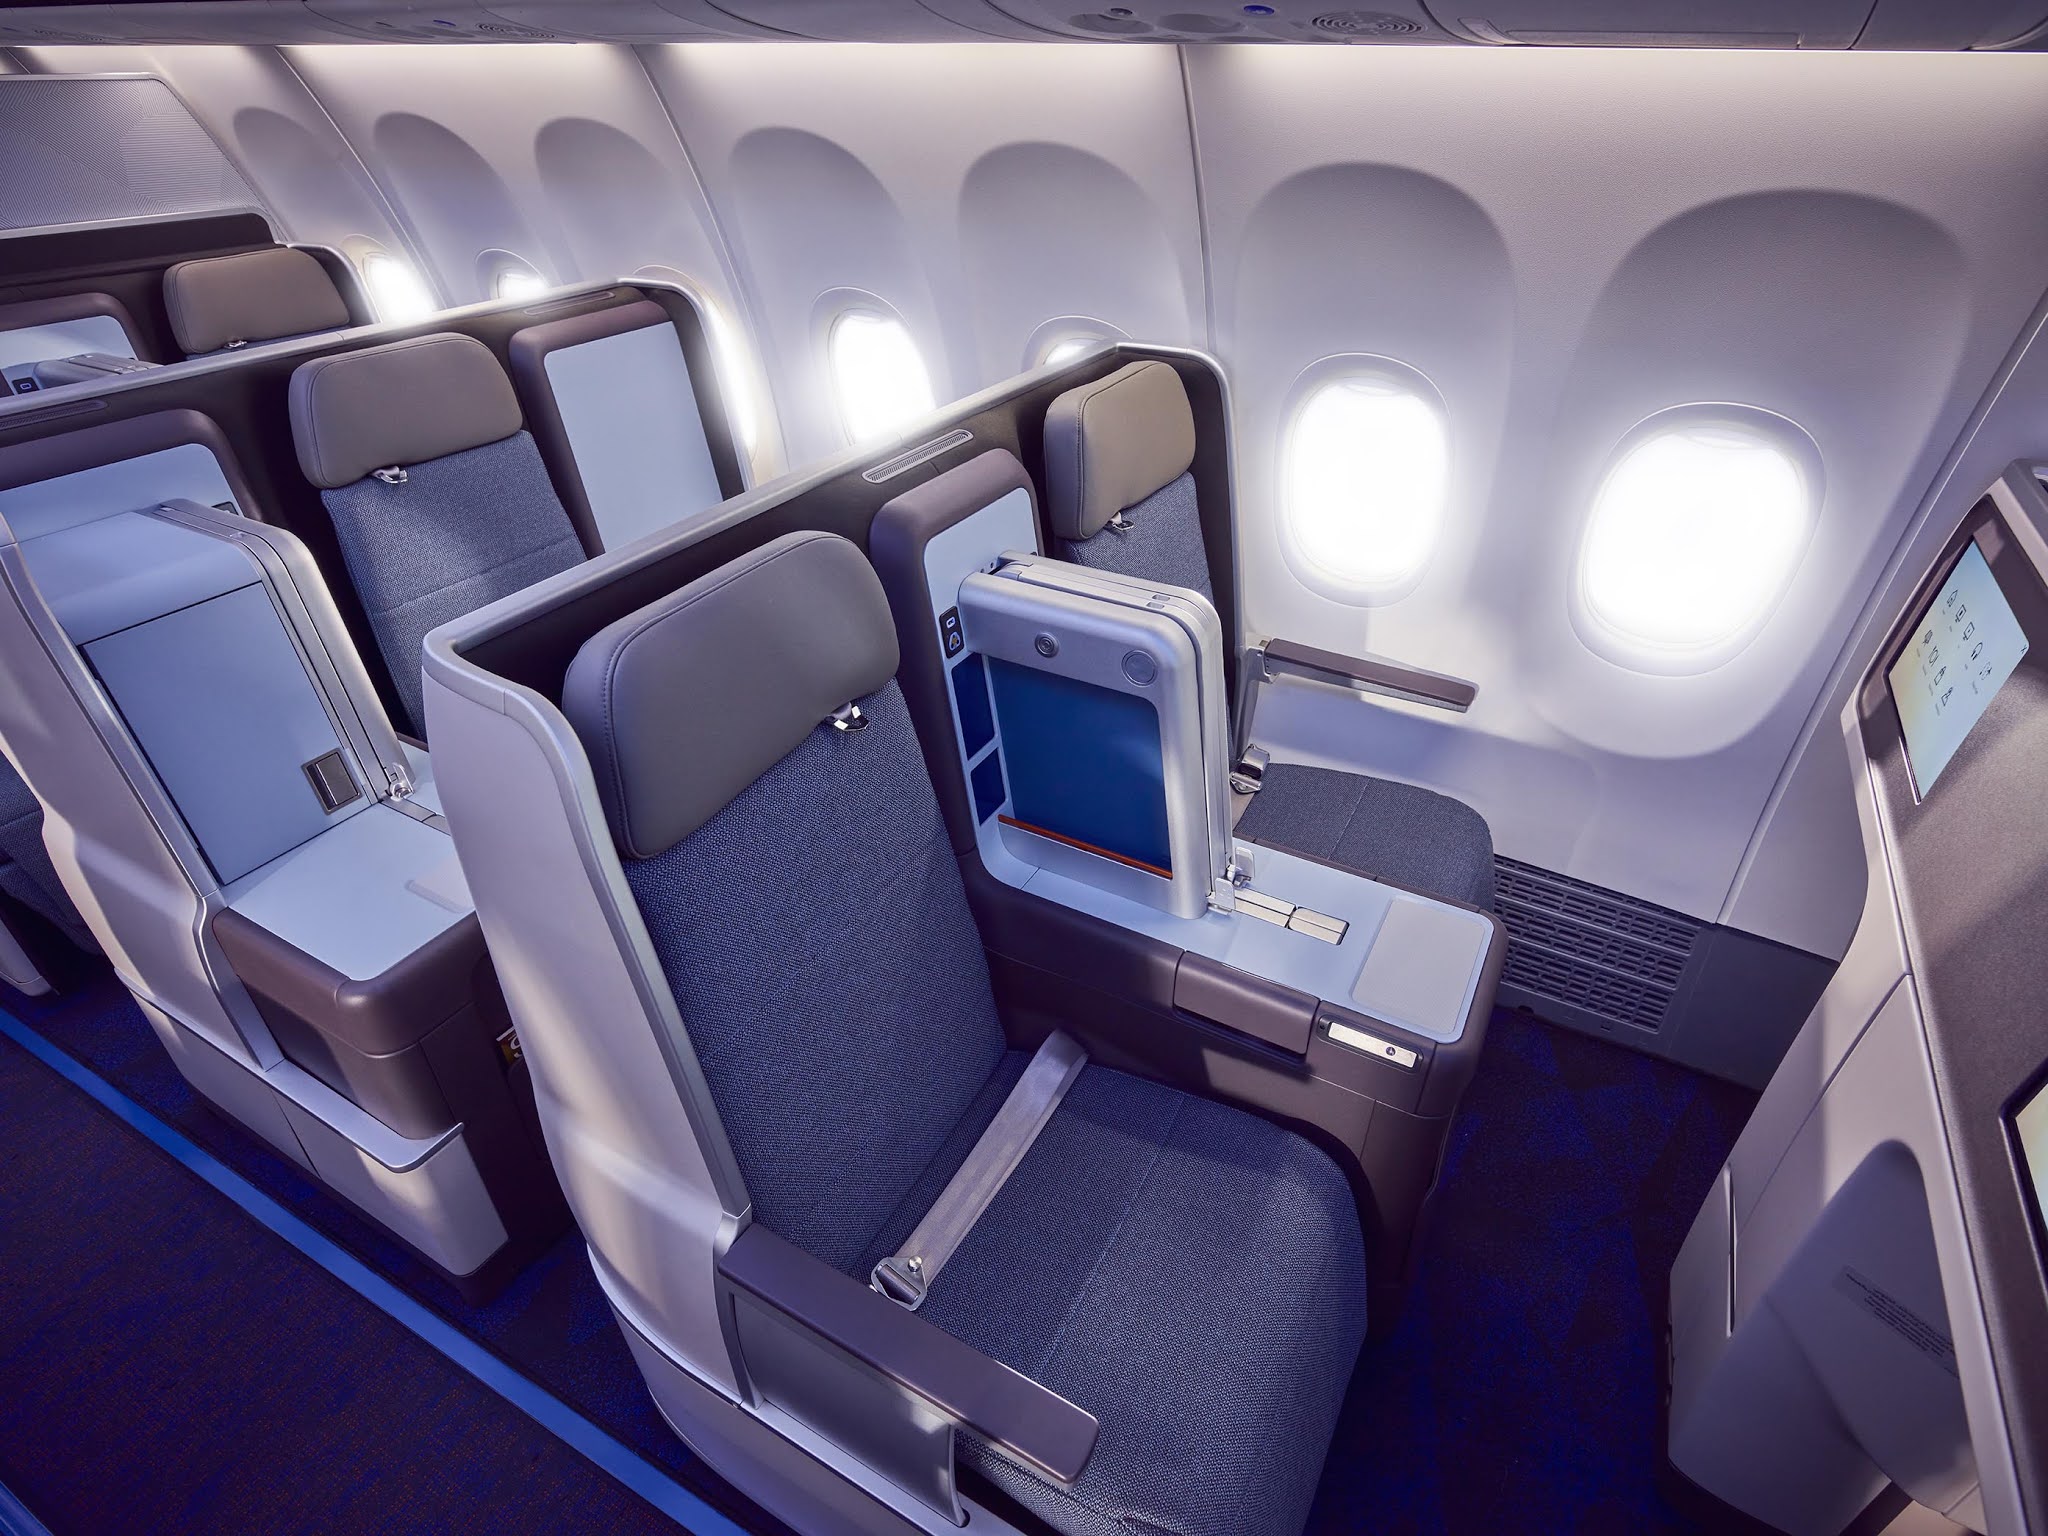 Flydubai reshapes onboard experience to meet the changing travel needs of customers